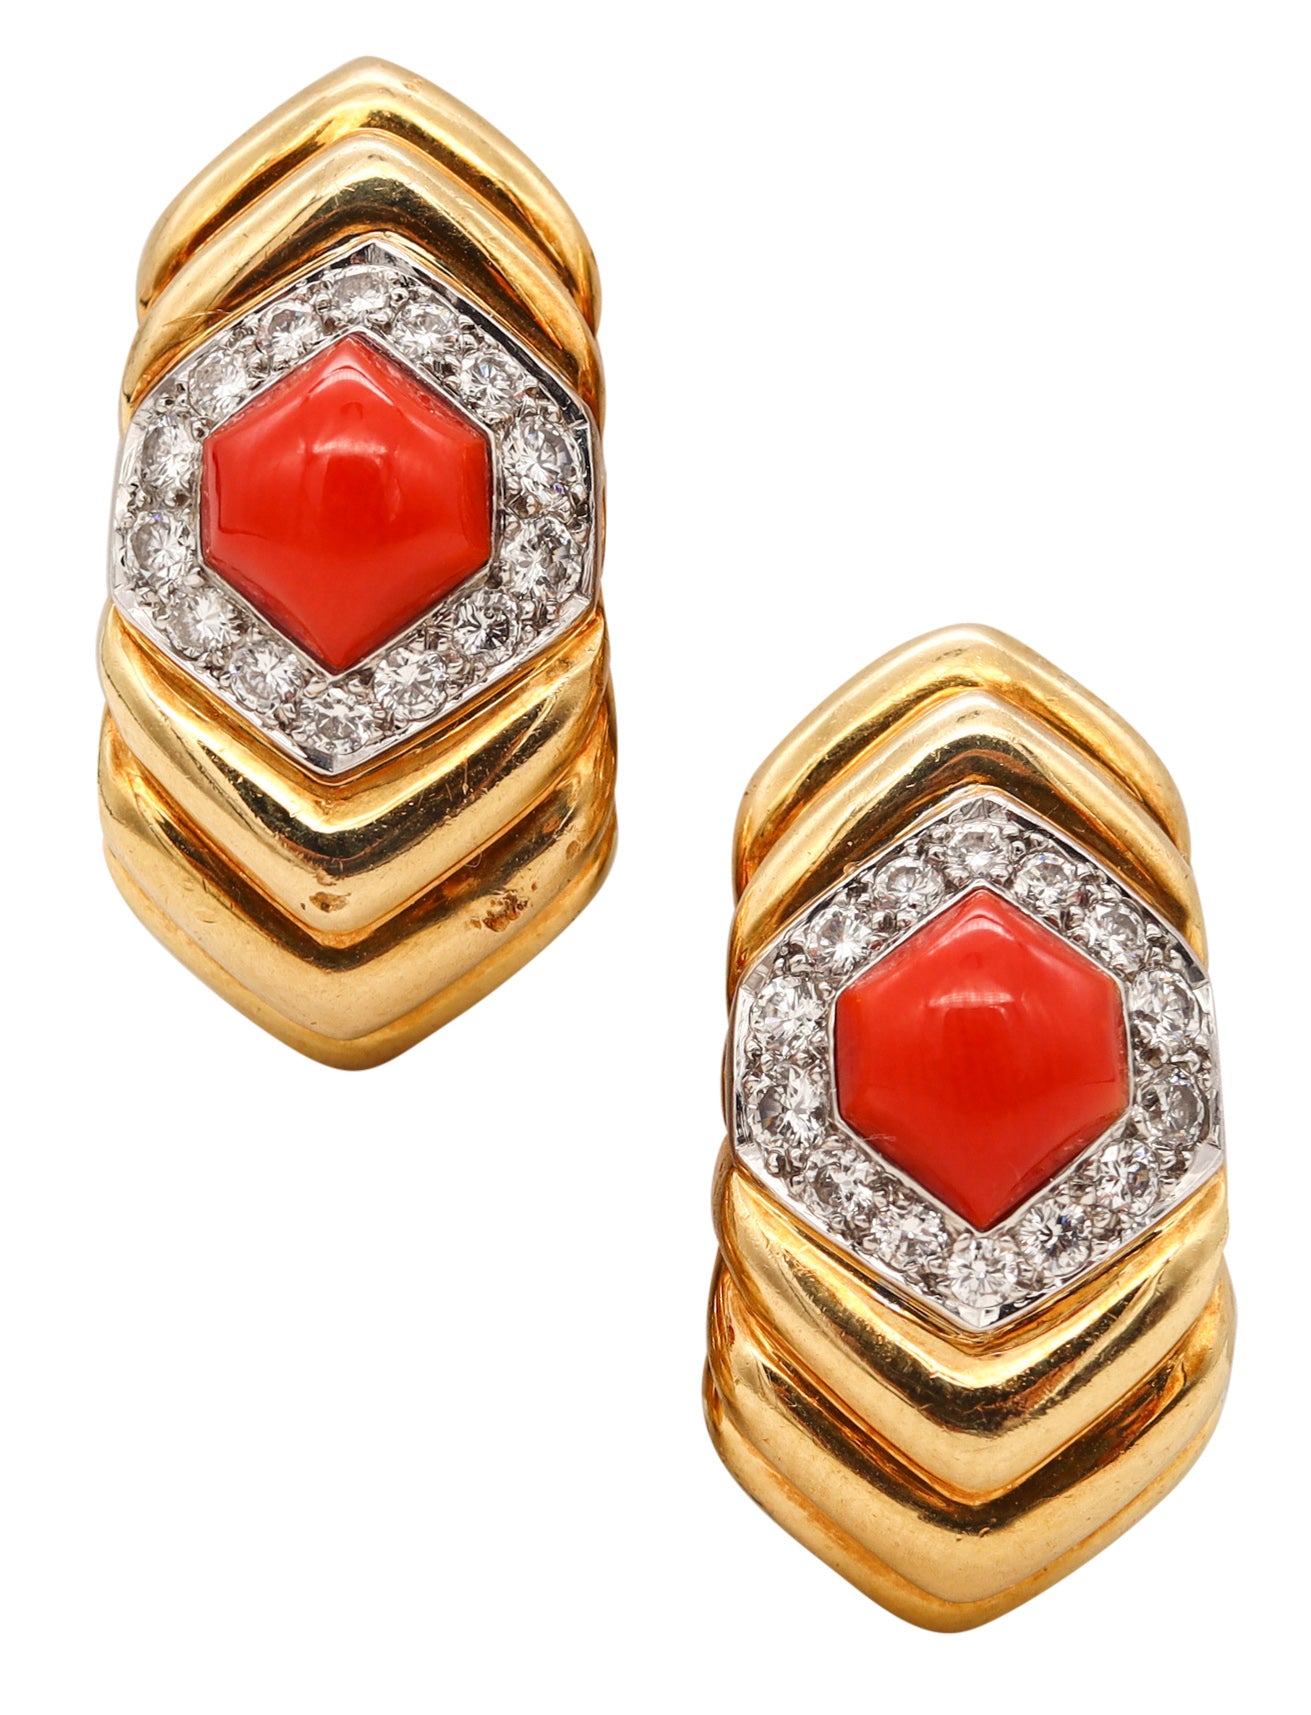 Charles Turi New York Clips Earrings In 18Kt Gold With 5.96 Cts In Diamonds And Red Corals